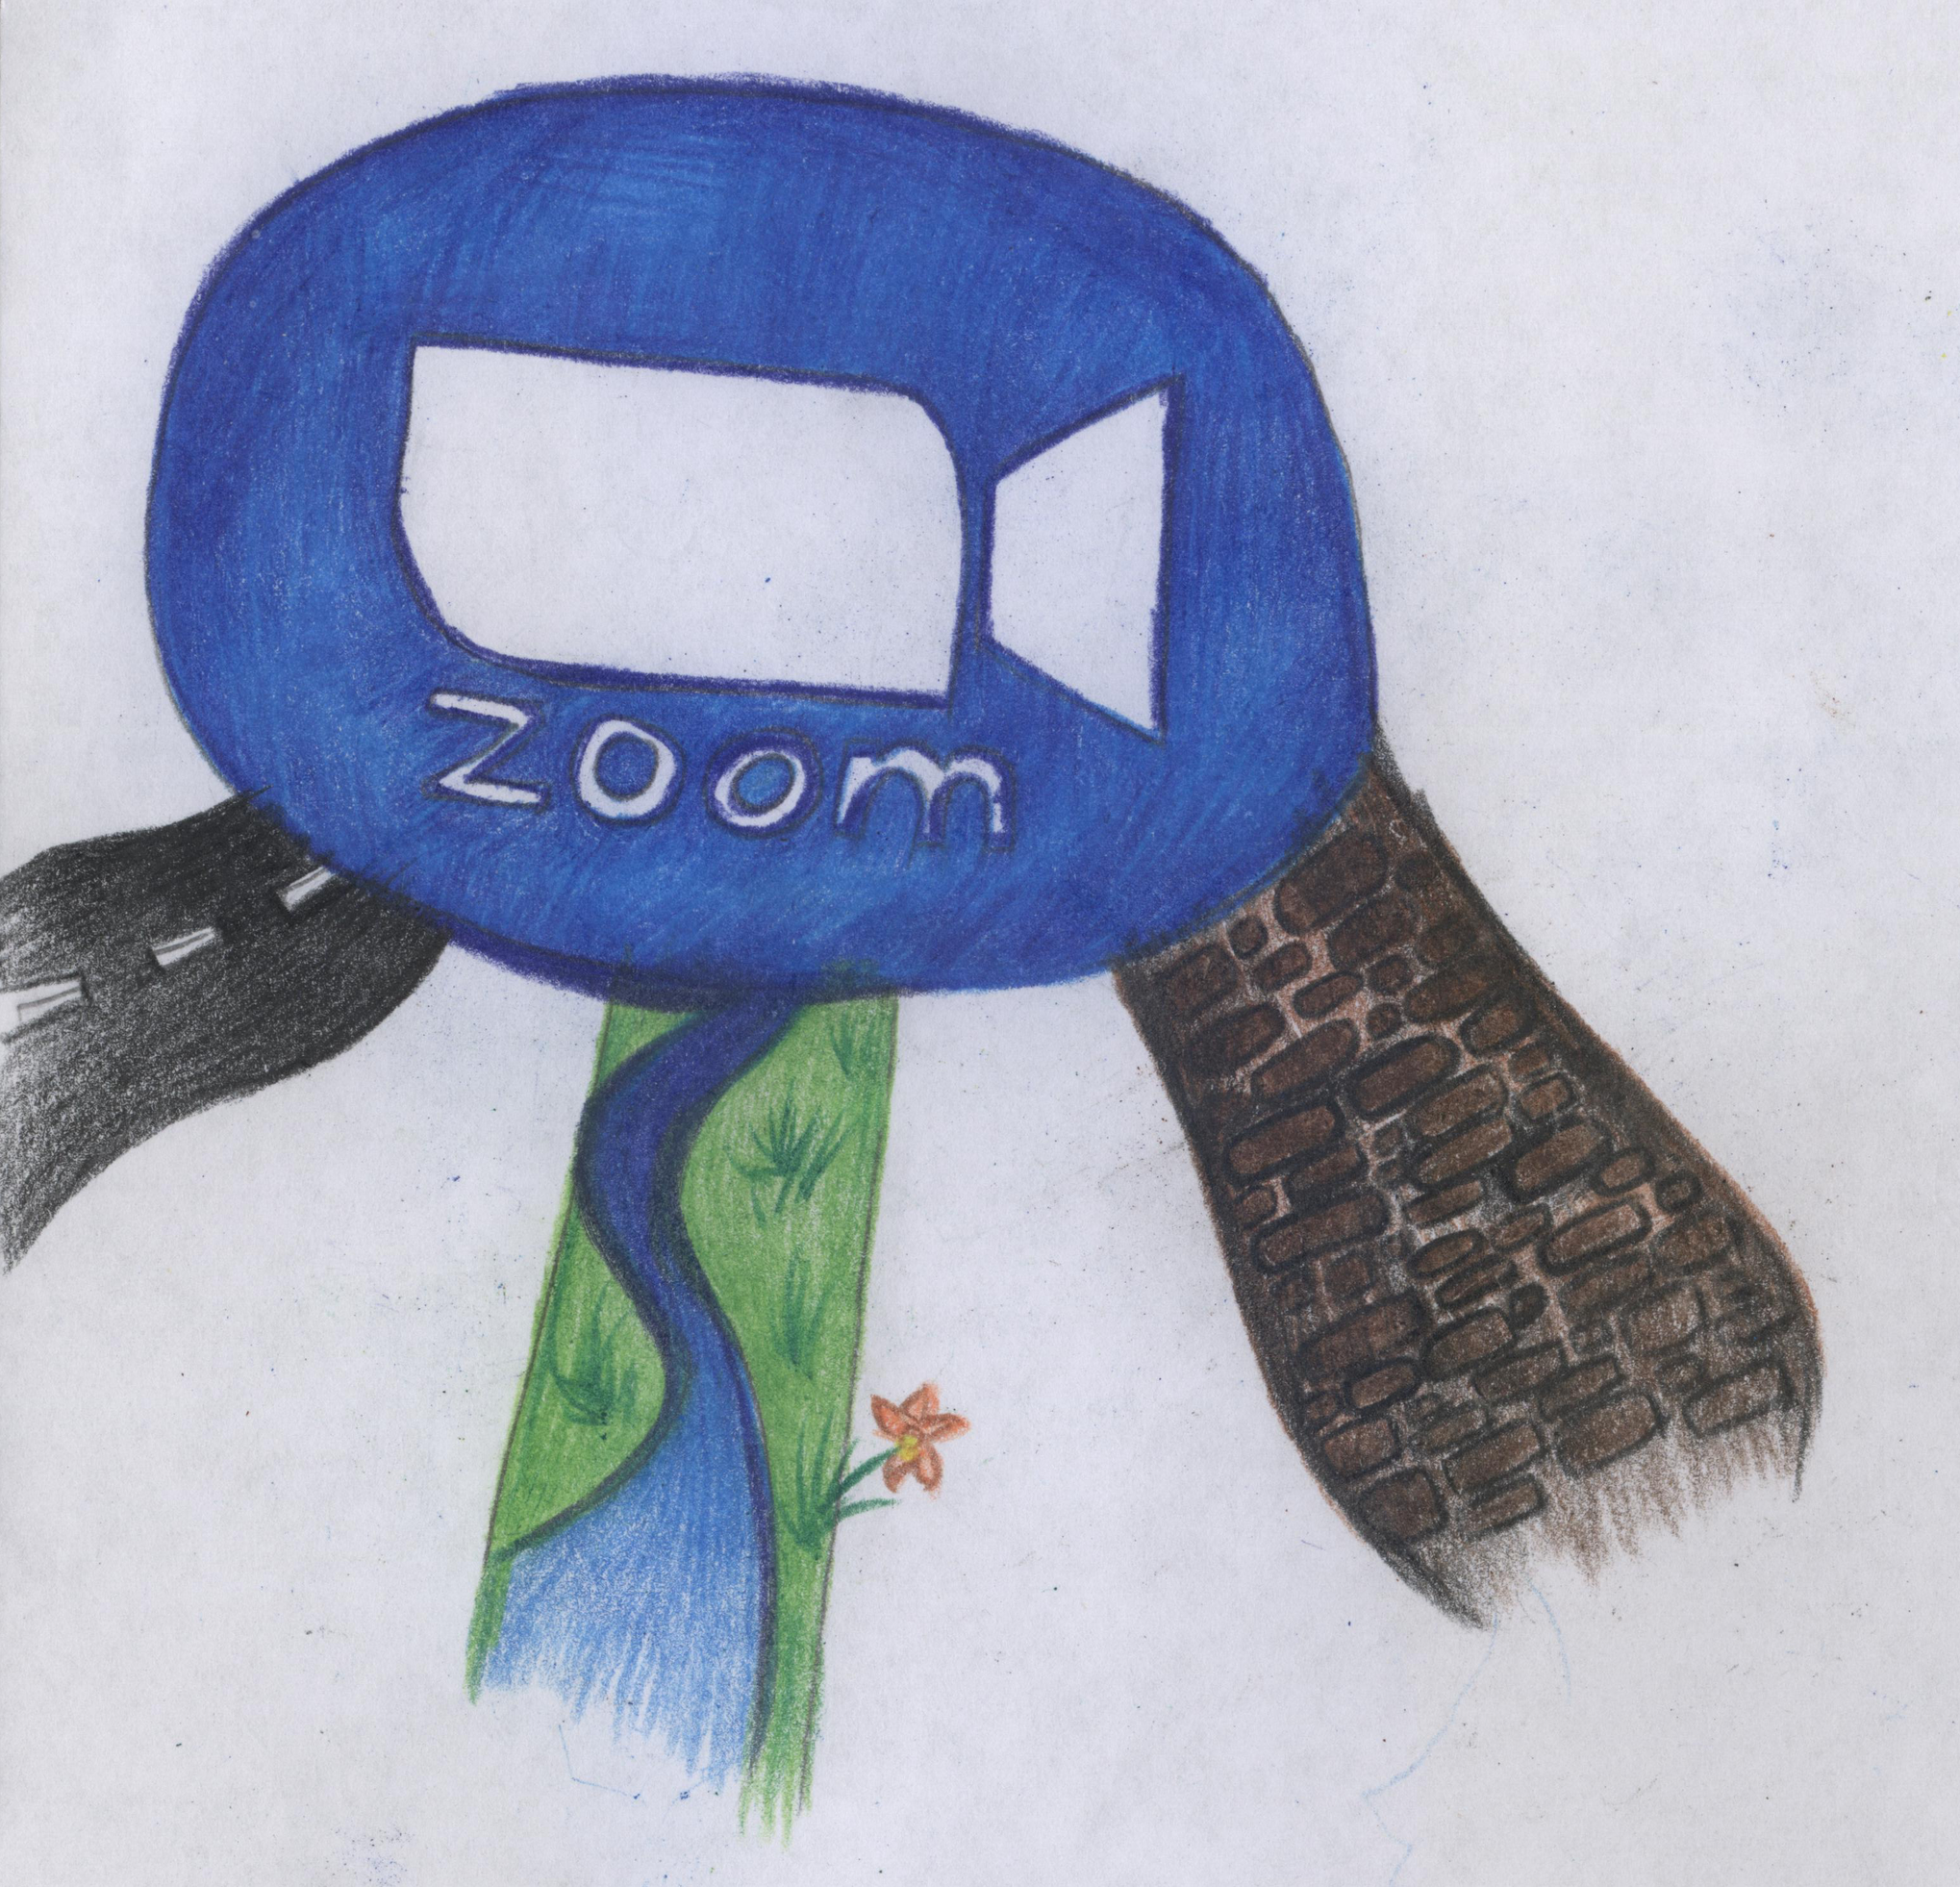 Colored pencil drawing of Zoom icon with a road, a stream, and a cobblestone path coming out of it